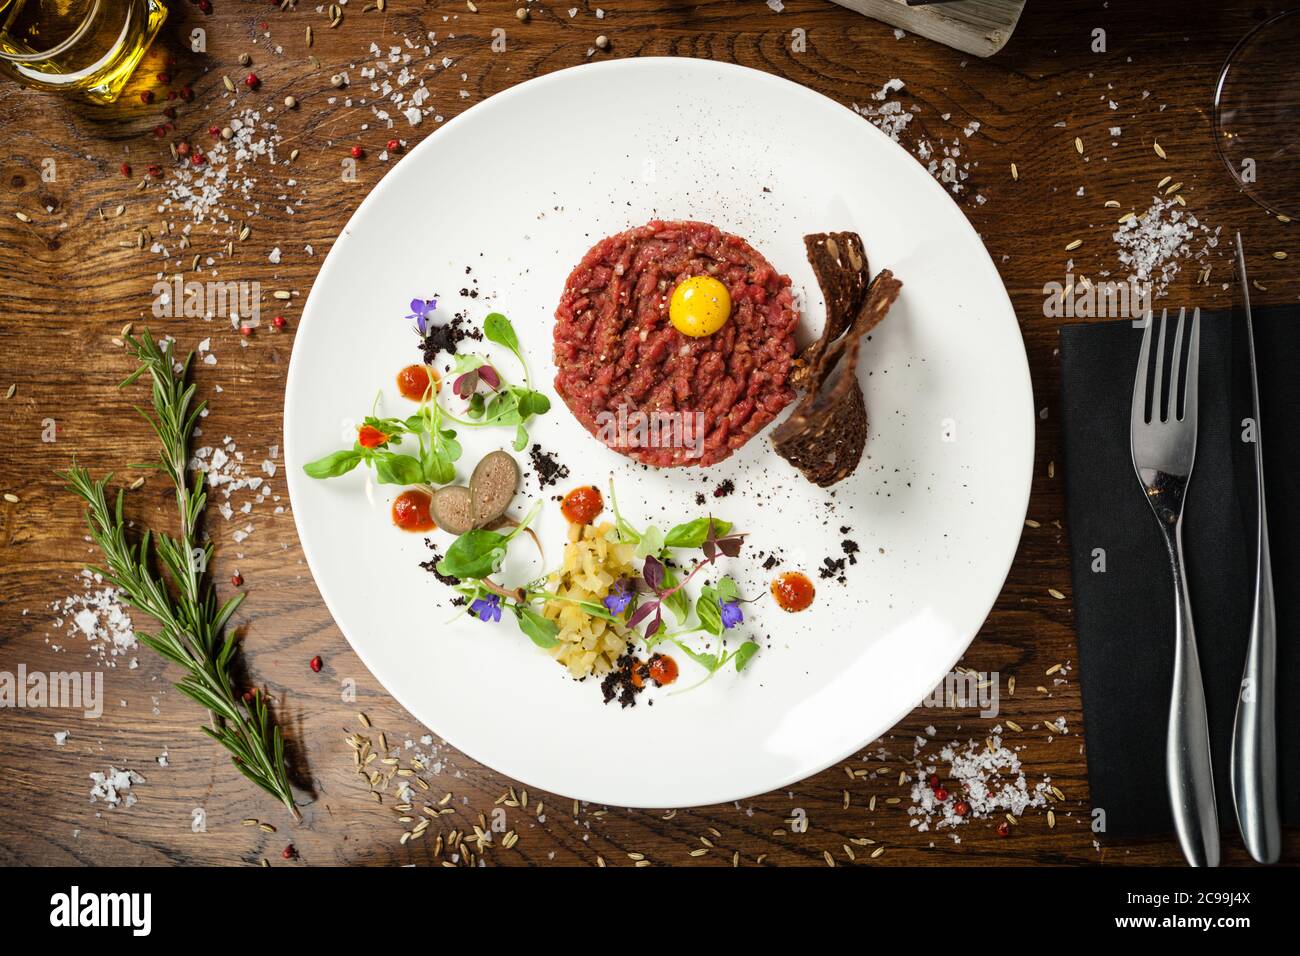 Steak tartare. Horseradish creme, black bread, baguette chips on white plate. Delicious healthy raw meat food closeup served on a table for lunch in Stock Photo